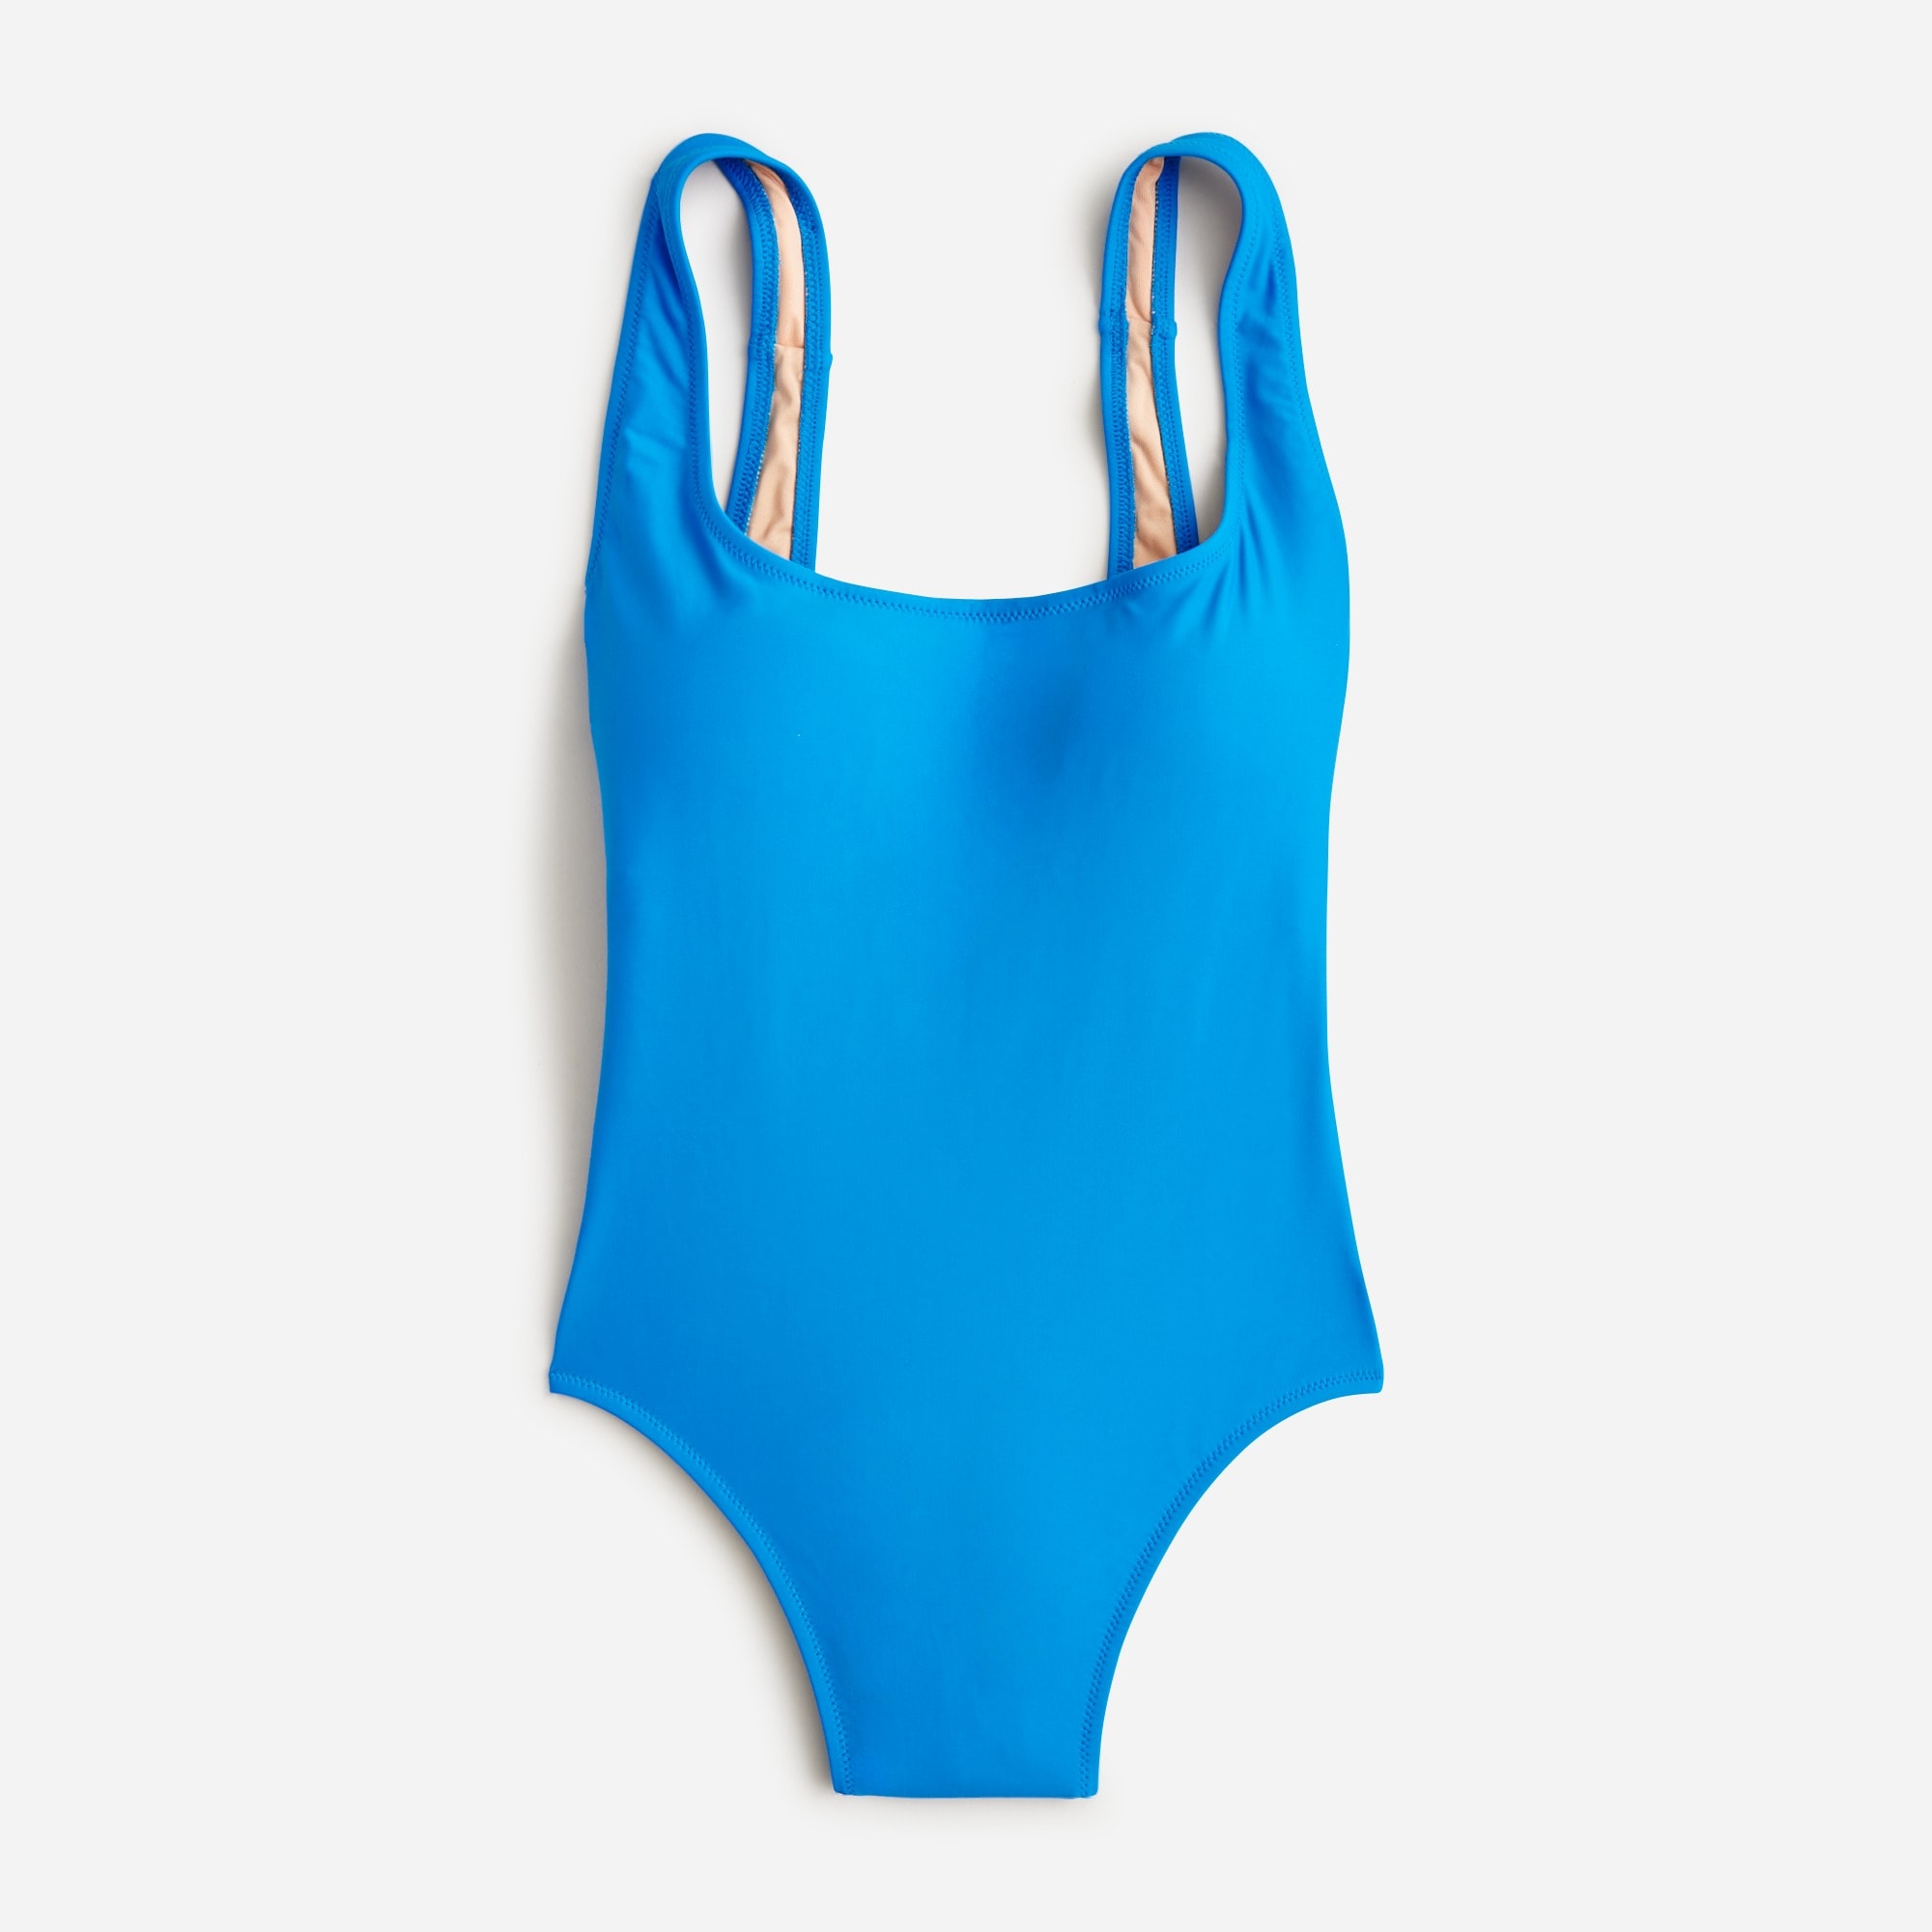  Heritage scoopback one-piece swimsuit